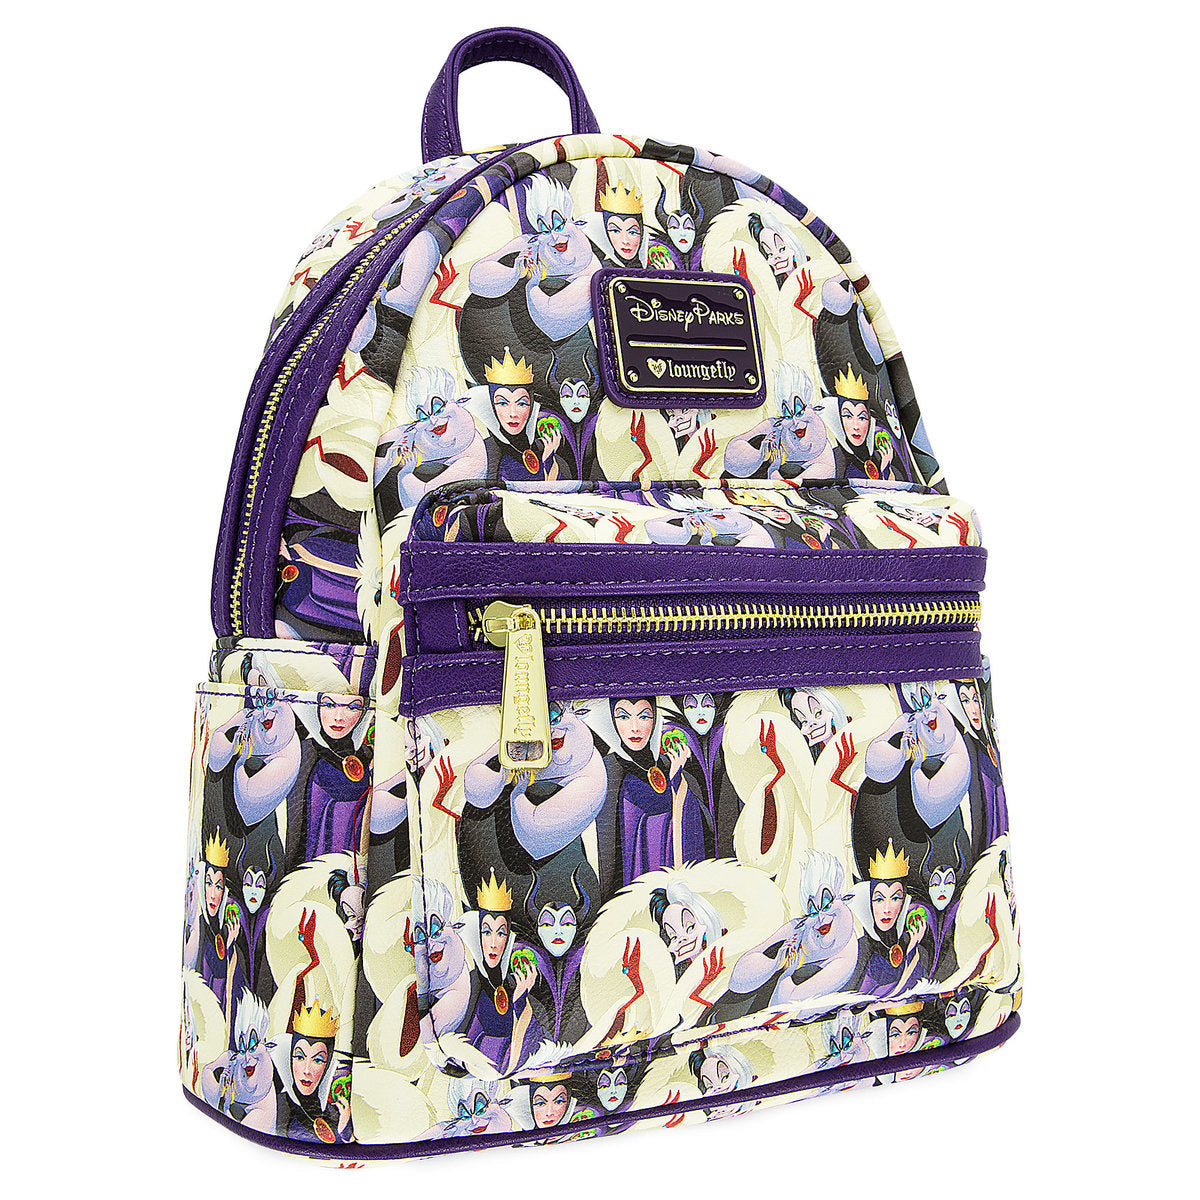 Disney Villains Mini Backpack by Loungefly New with Tags